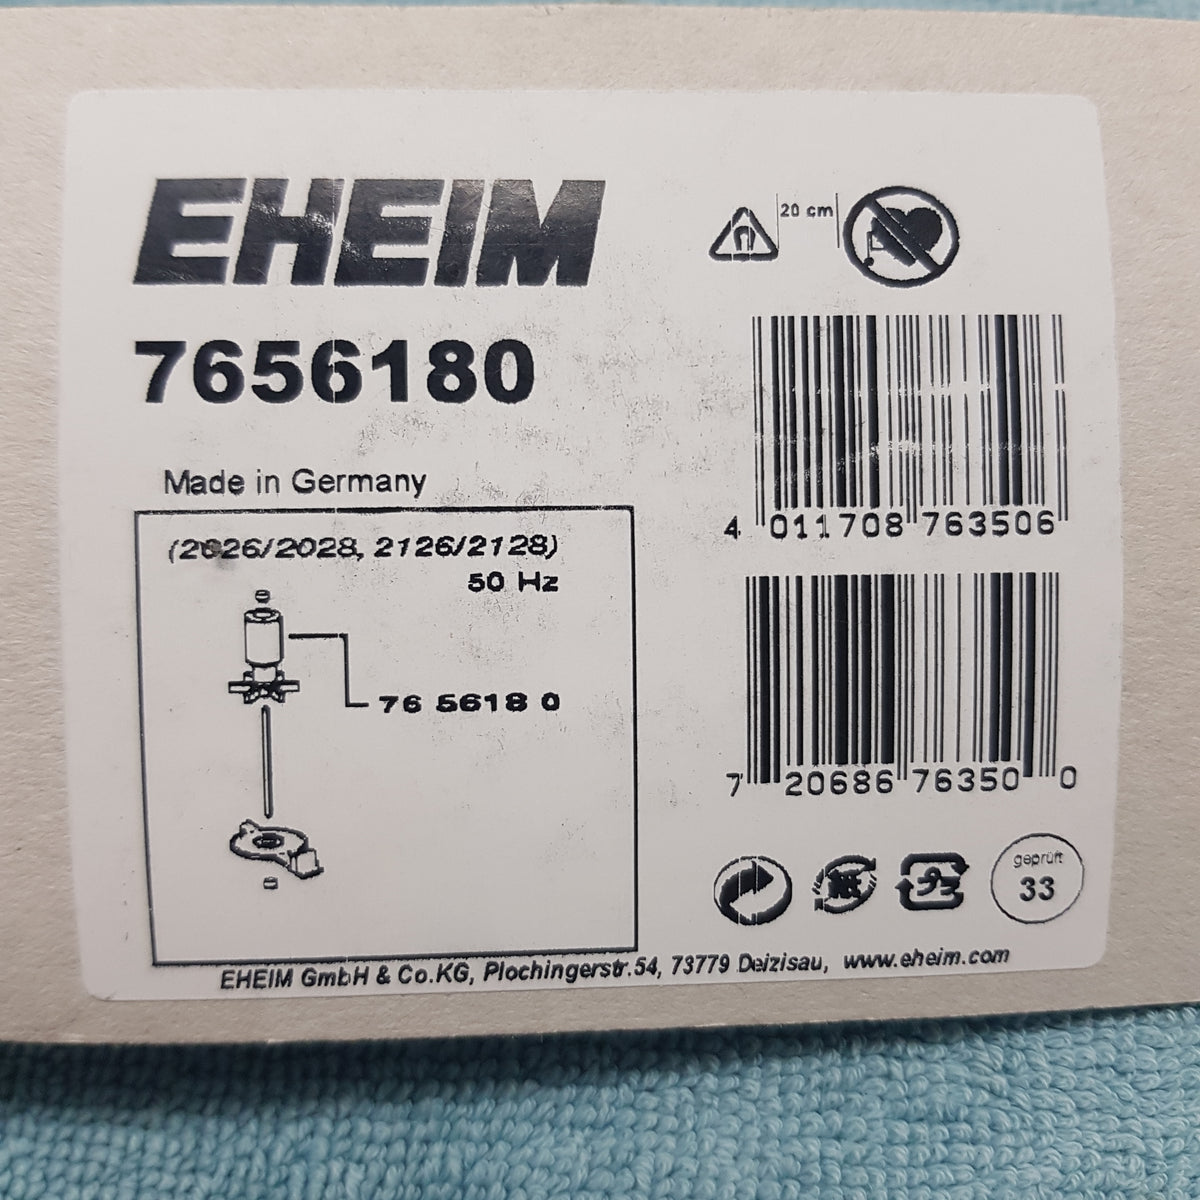 Eheim 7656180 Impeller to suit 2026 2028 2126 2128 filters